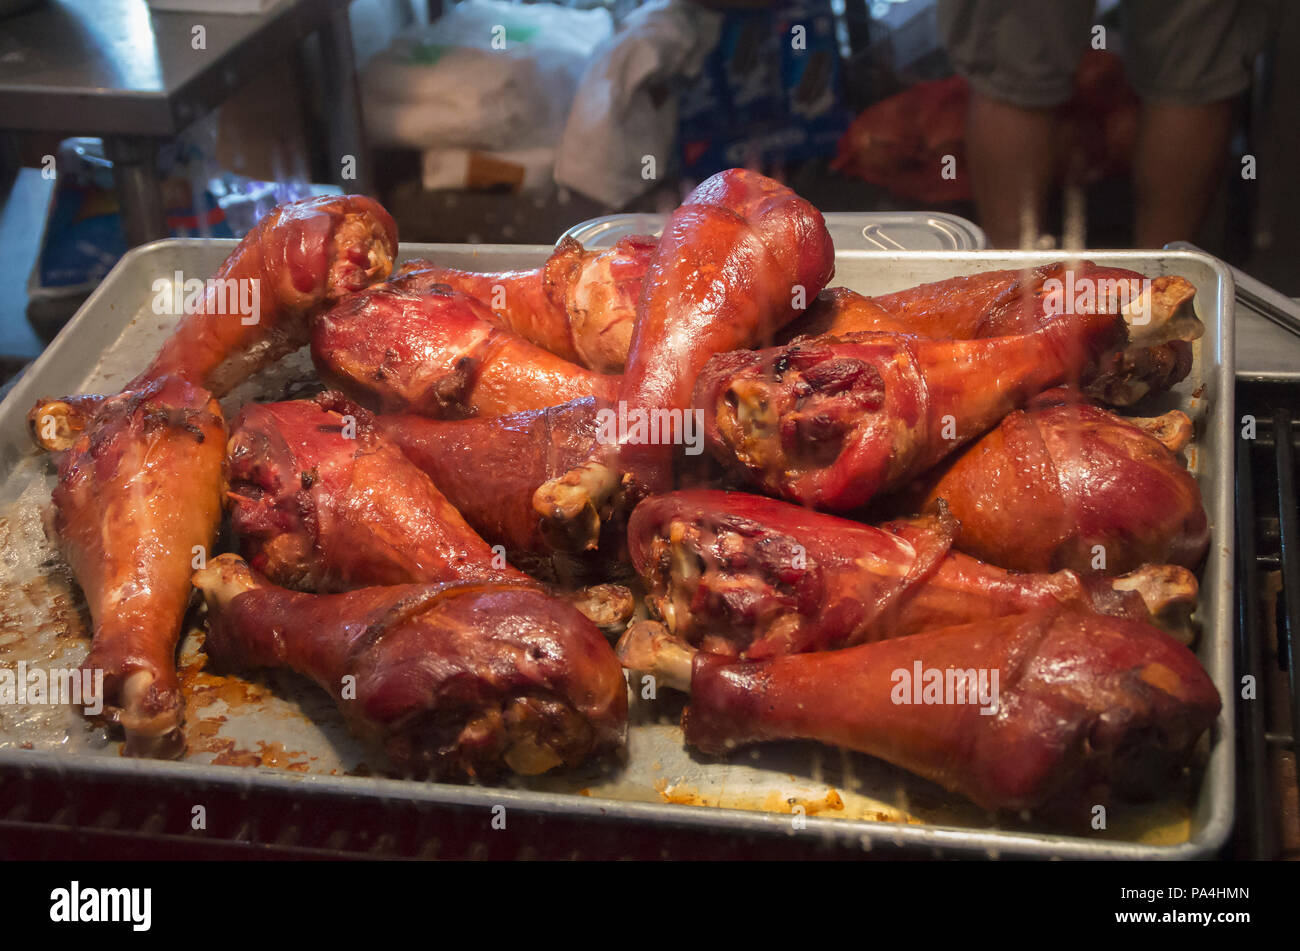 A batch of Turkey Legs waiting for sale from a food vendor at Sunfest in Ocean City,Maryland Stock Photo